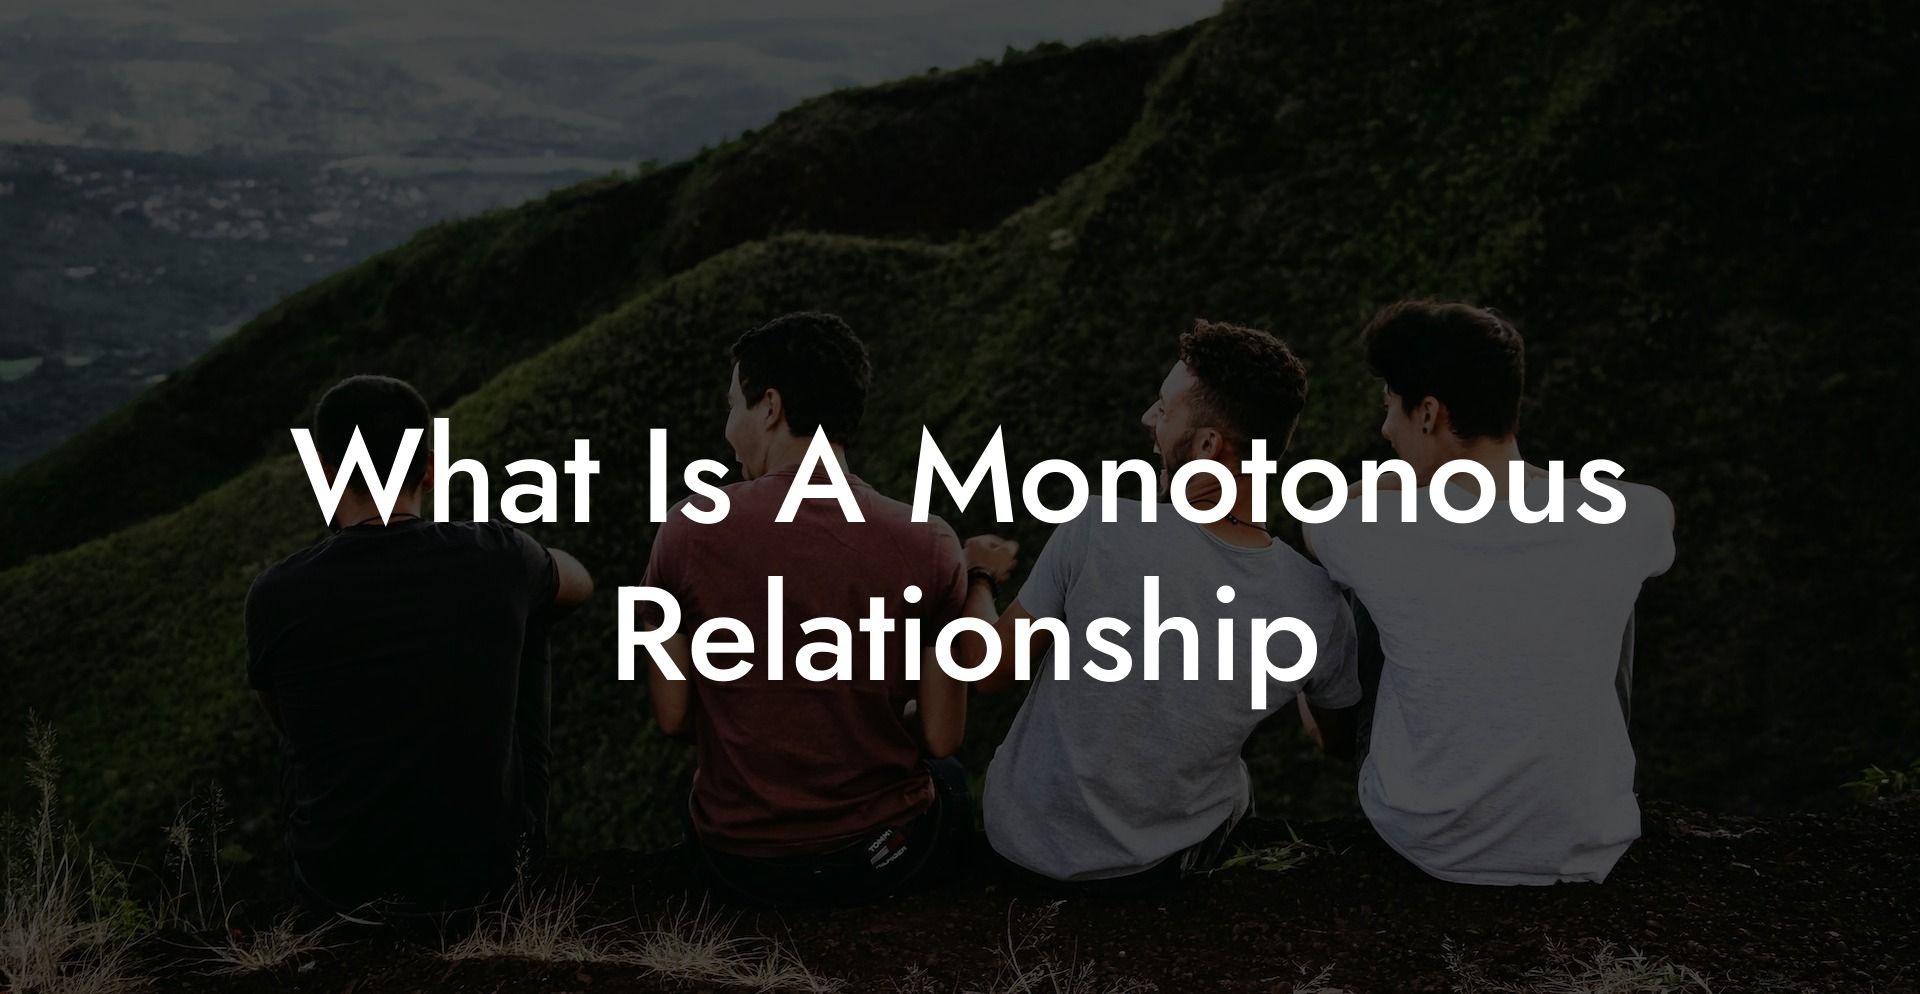 What Is A Monotonous Relationship